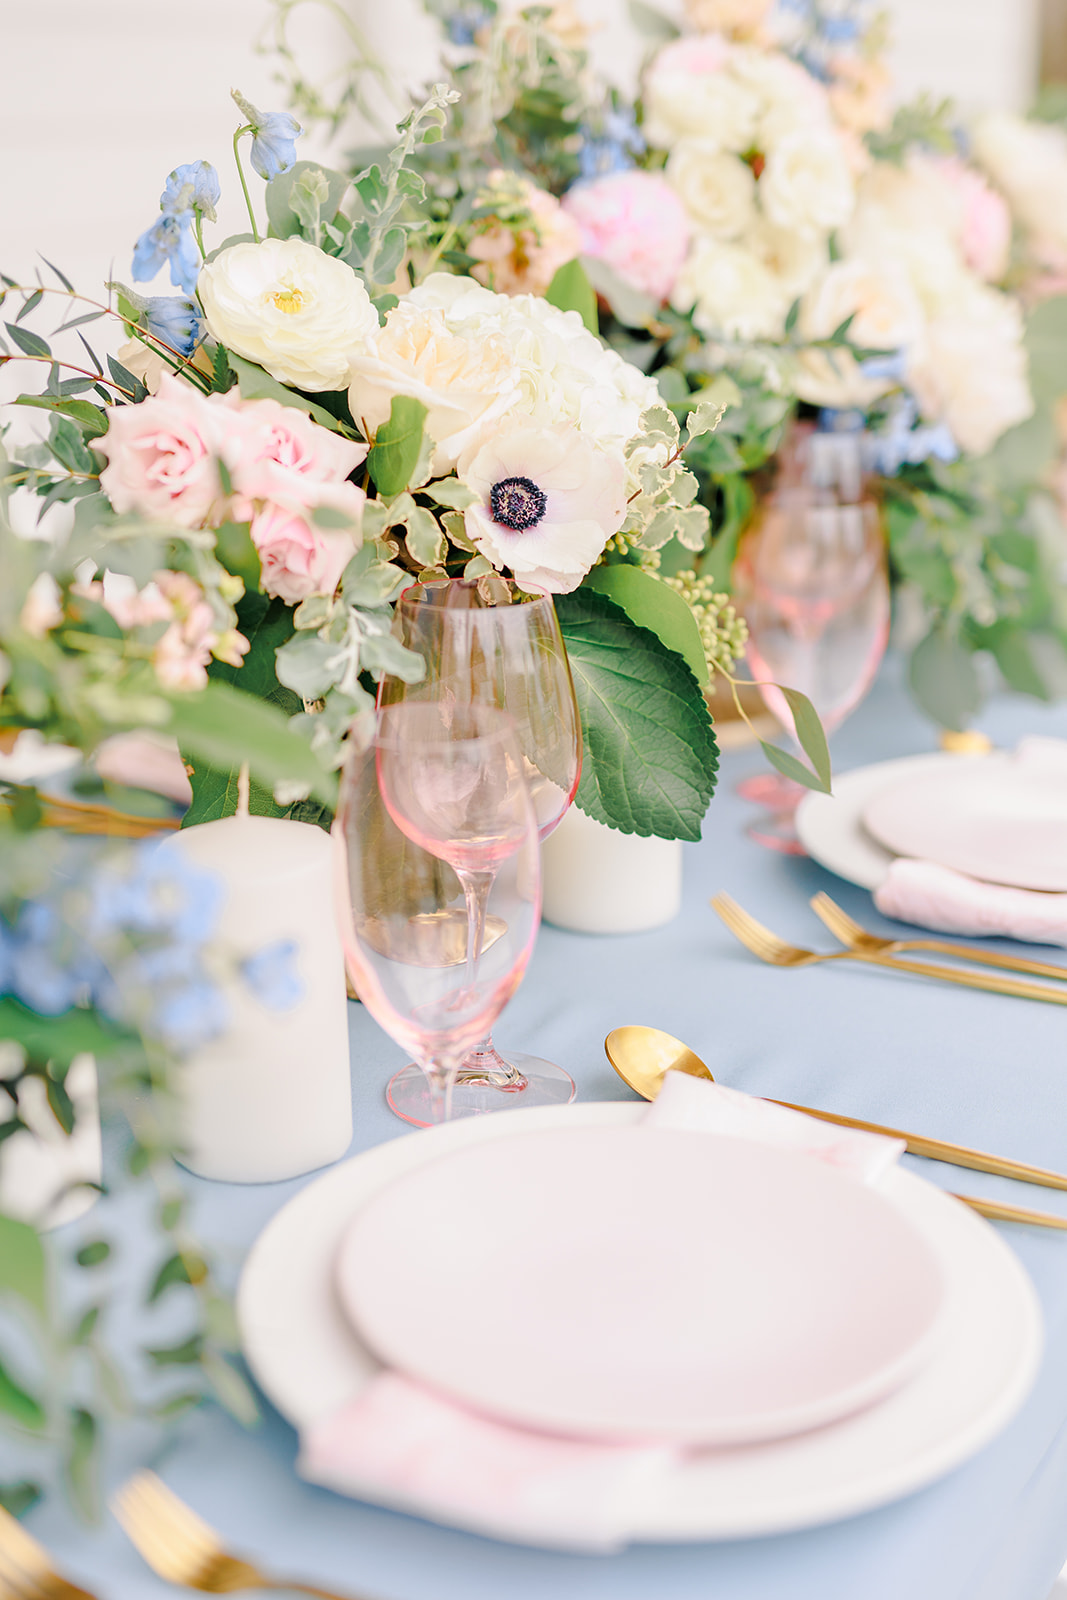 Cotton Candy Inspired Shoot | Brittany Riggan Photography